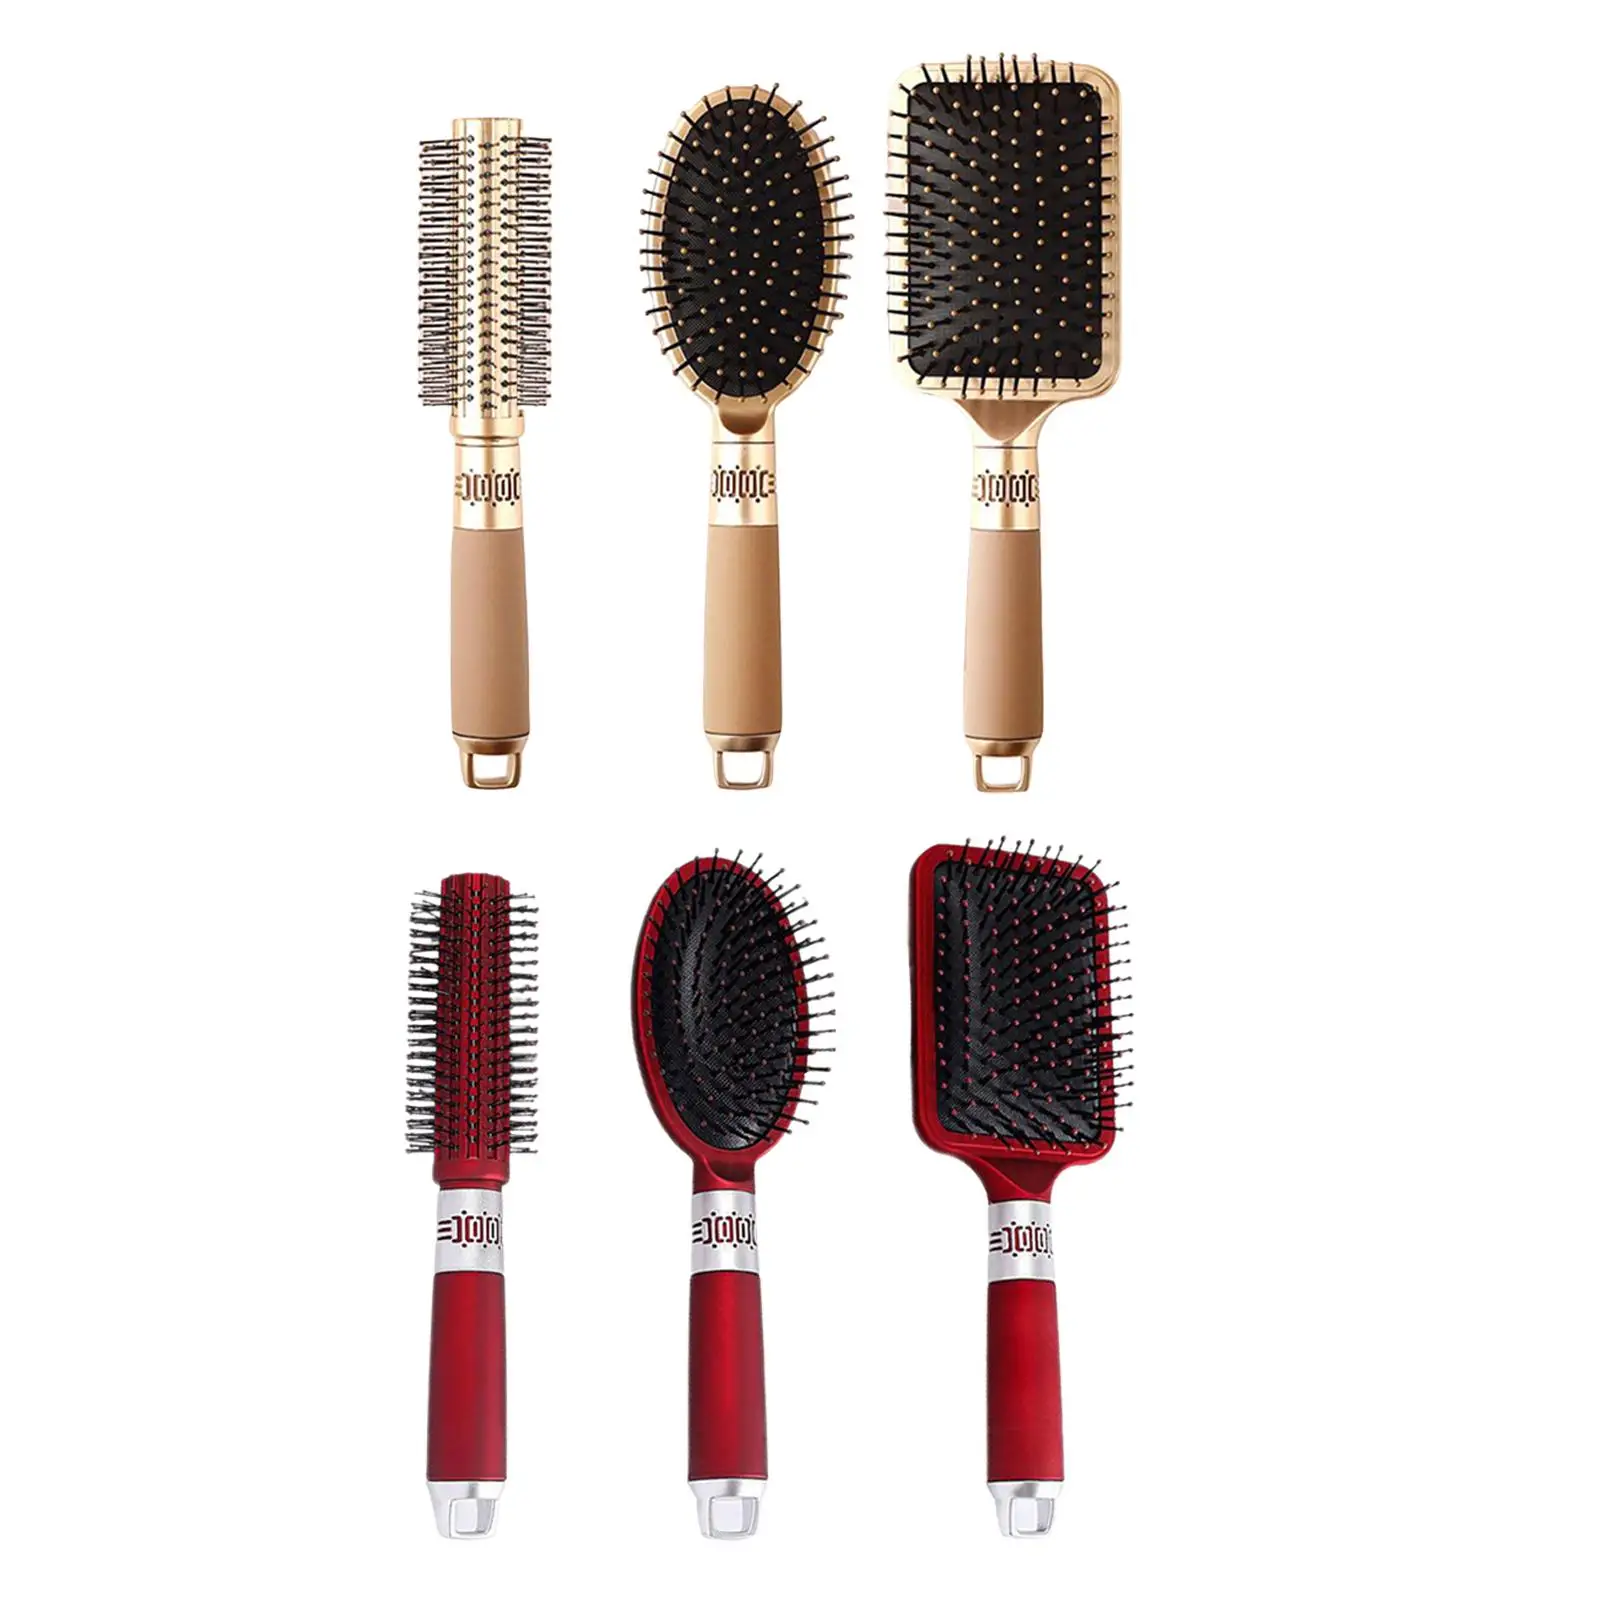 

3x Hair Brush Set with Ball Tip Bristles Hairbrushes for Straight Thick Curly Hair